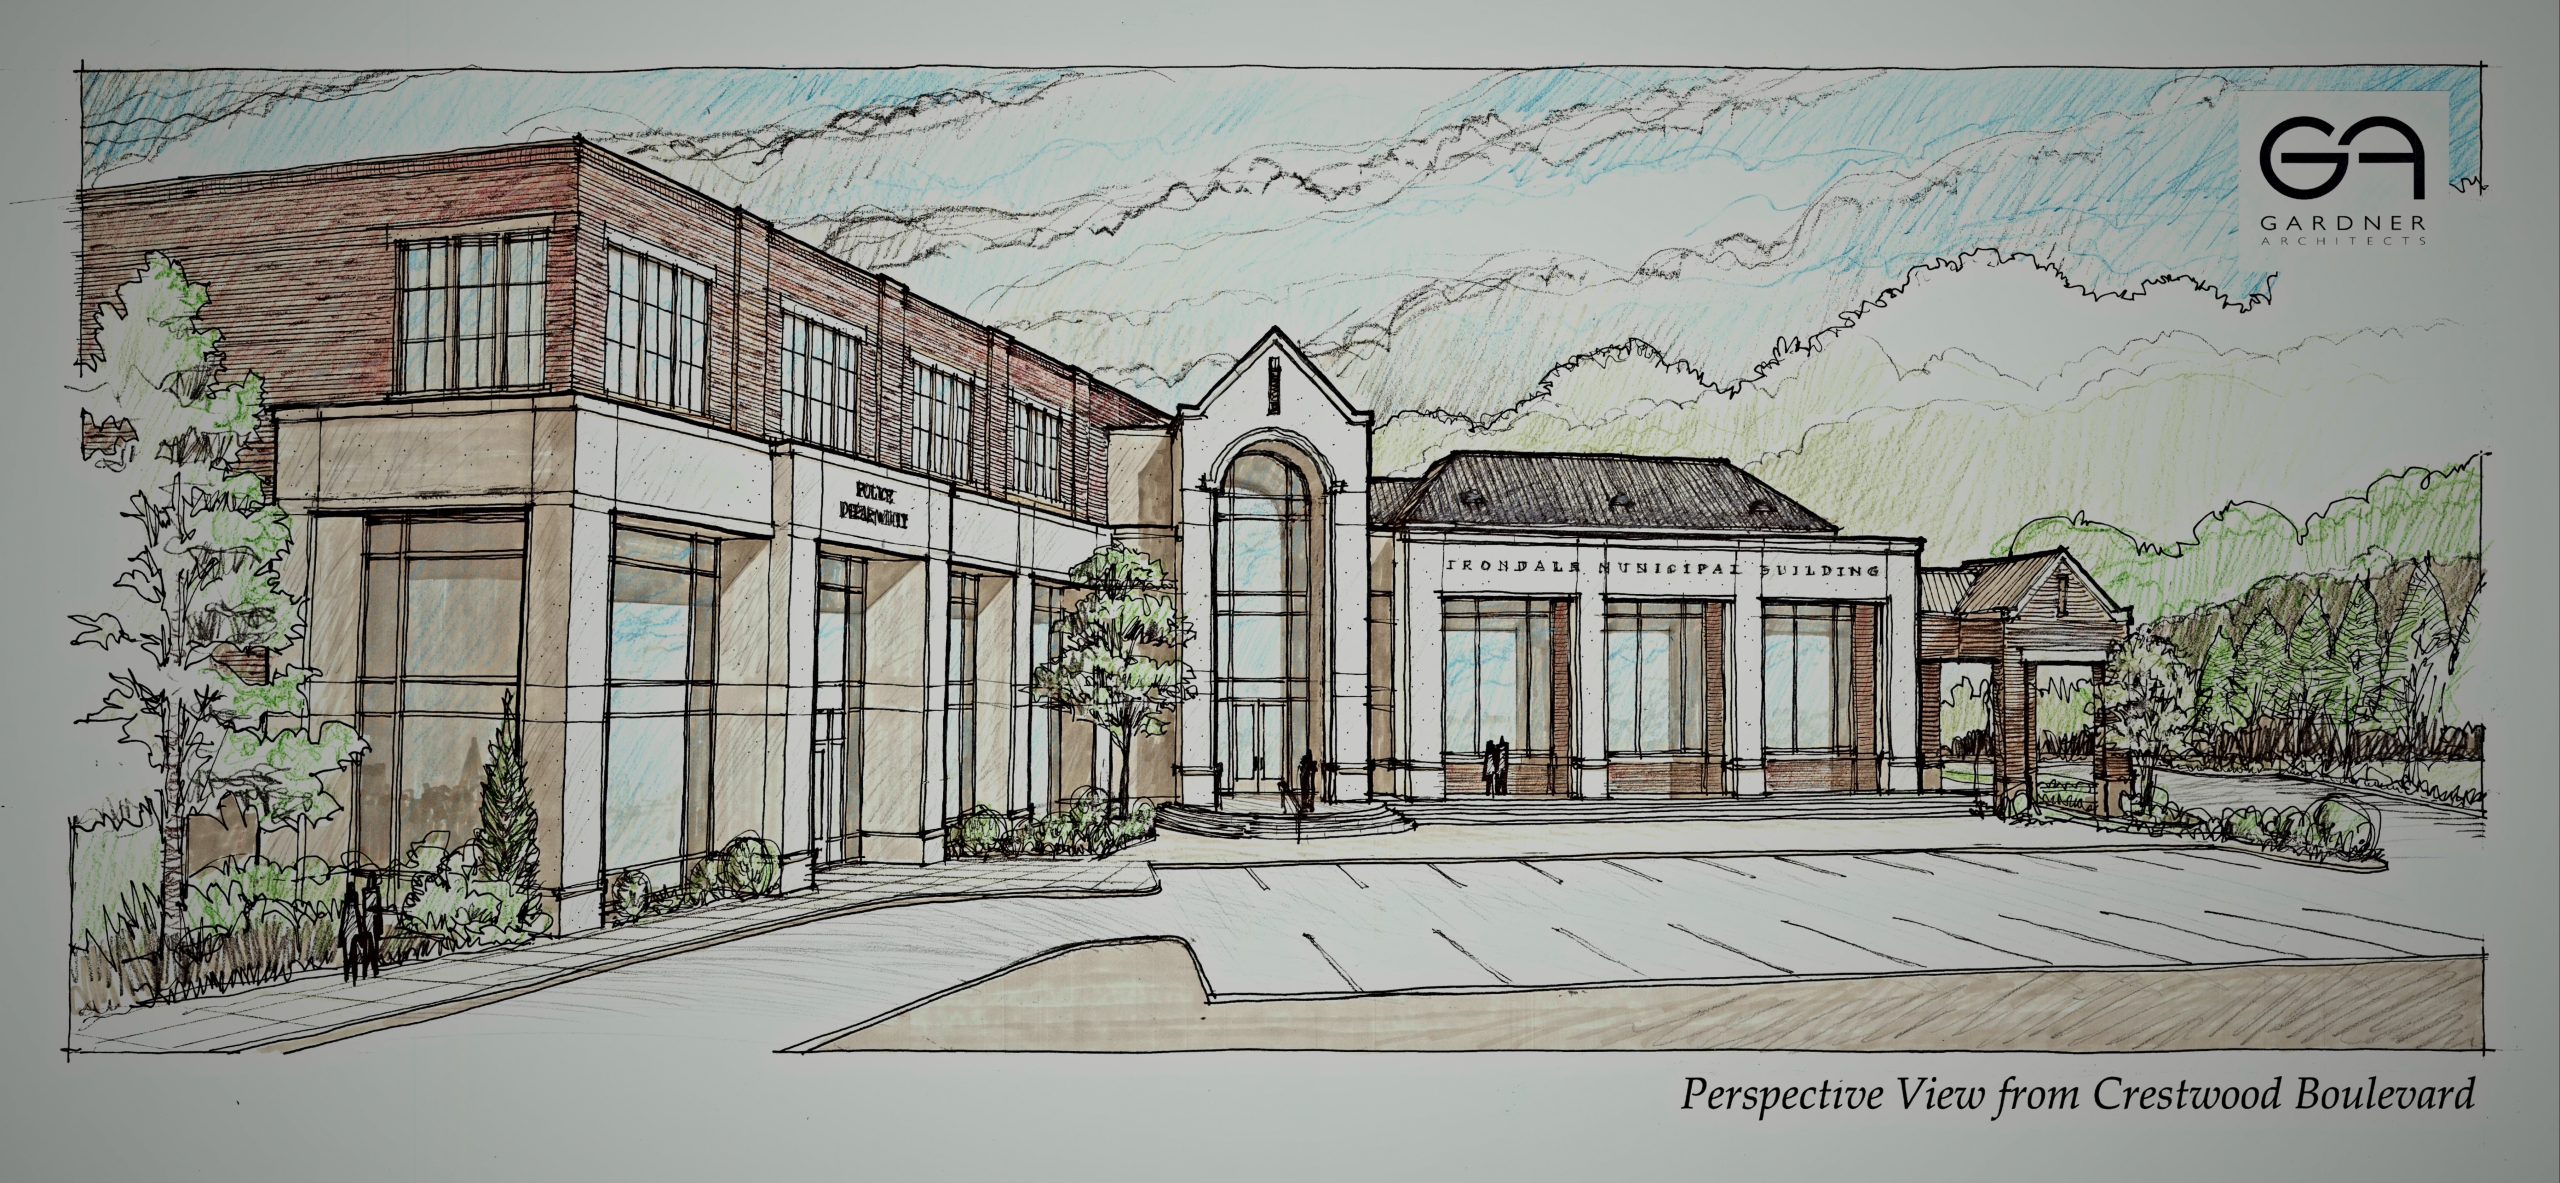 Irondale approves contract for Municipal Complex, updates status on Grants Mill Road